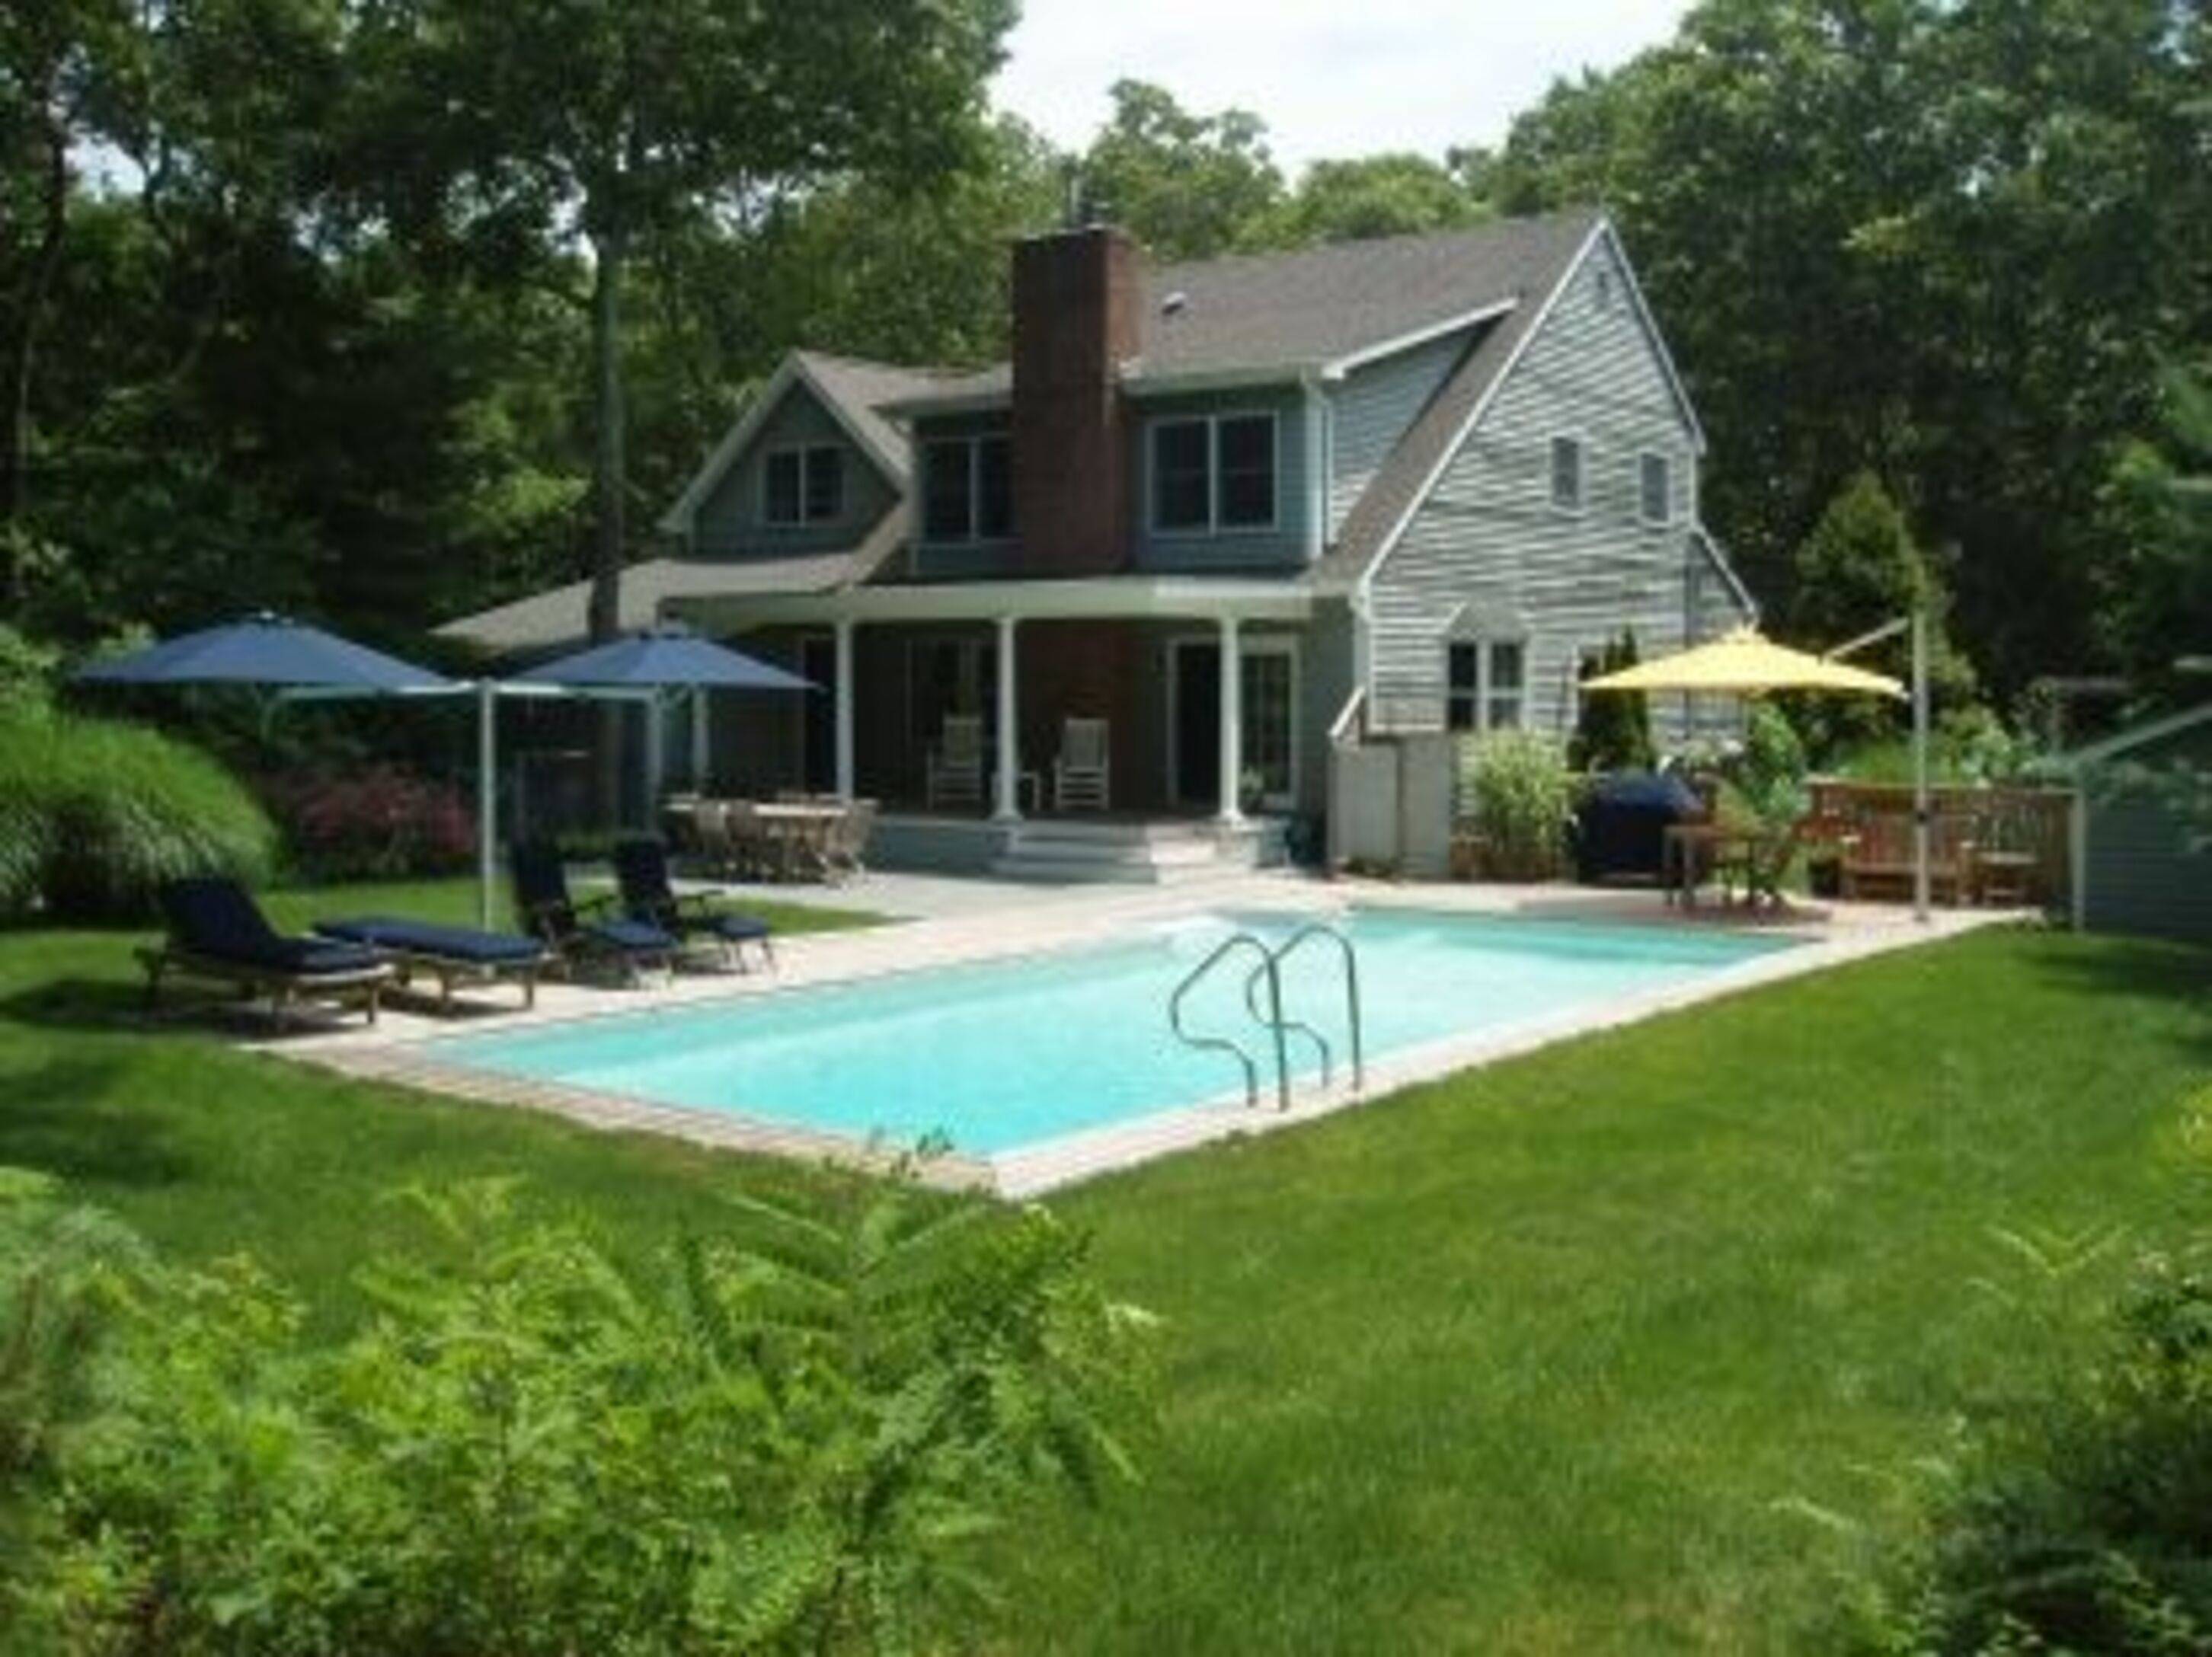 Still Available! Close to East Hampton and Sag Harbor